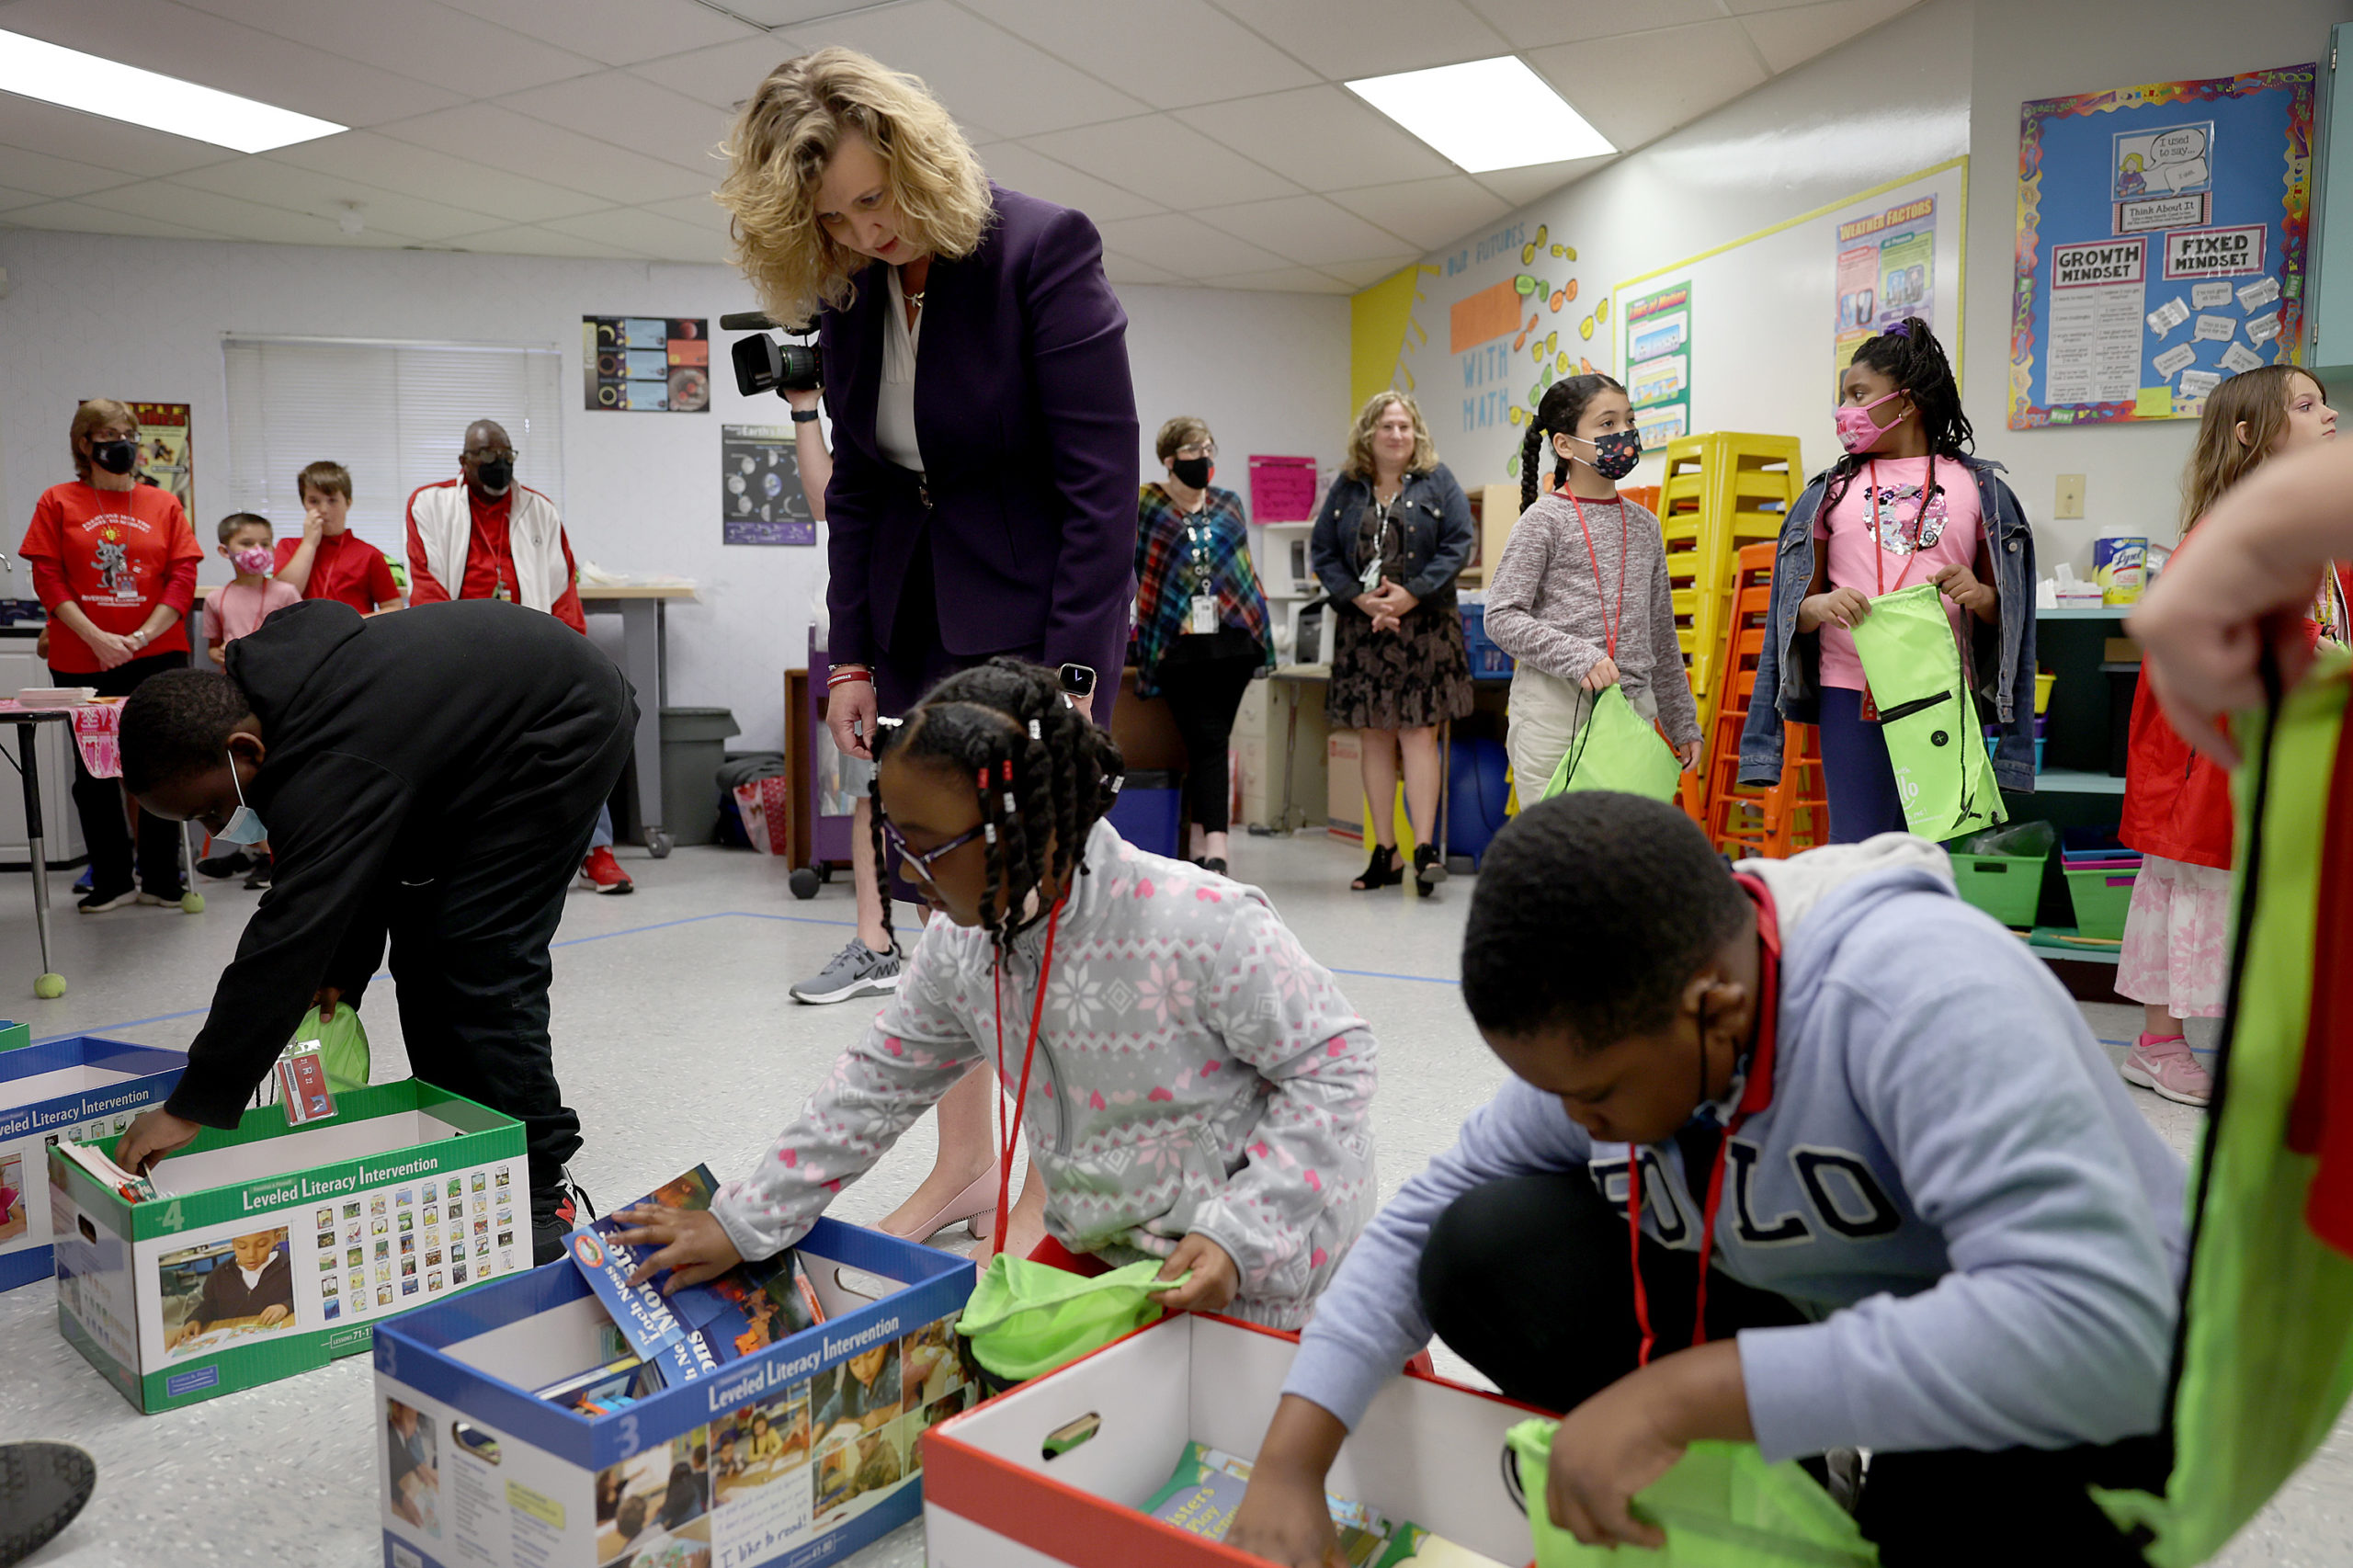 Dr. Vickie L. Cartwright, Superintendent of Broward County Public Schools, helps children find books to be given out for summer reading at Riverside Elementary school as the school district observes A Day of Service and Love in commemoration of the 17 people killed at Marjory Stoneman Douglas High School on February 14, 2022 in Coral Springs, Florida. Four years ago on February 14, fourteen students and three staff members were killed during a mass shooting at the school located in Parkland, Florida. (Photo by Joe Raedle/Getty Images)